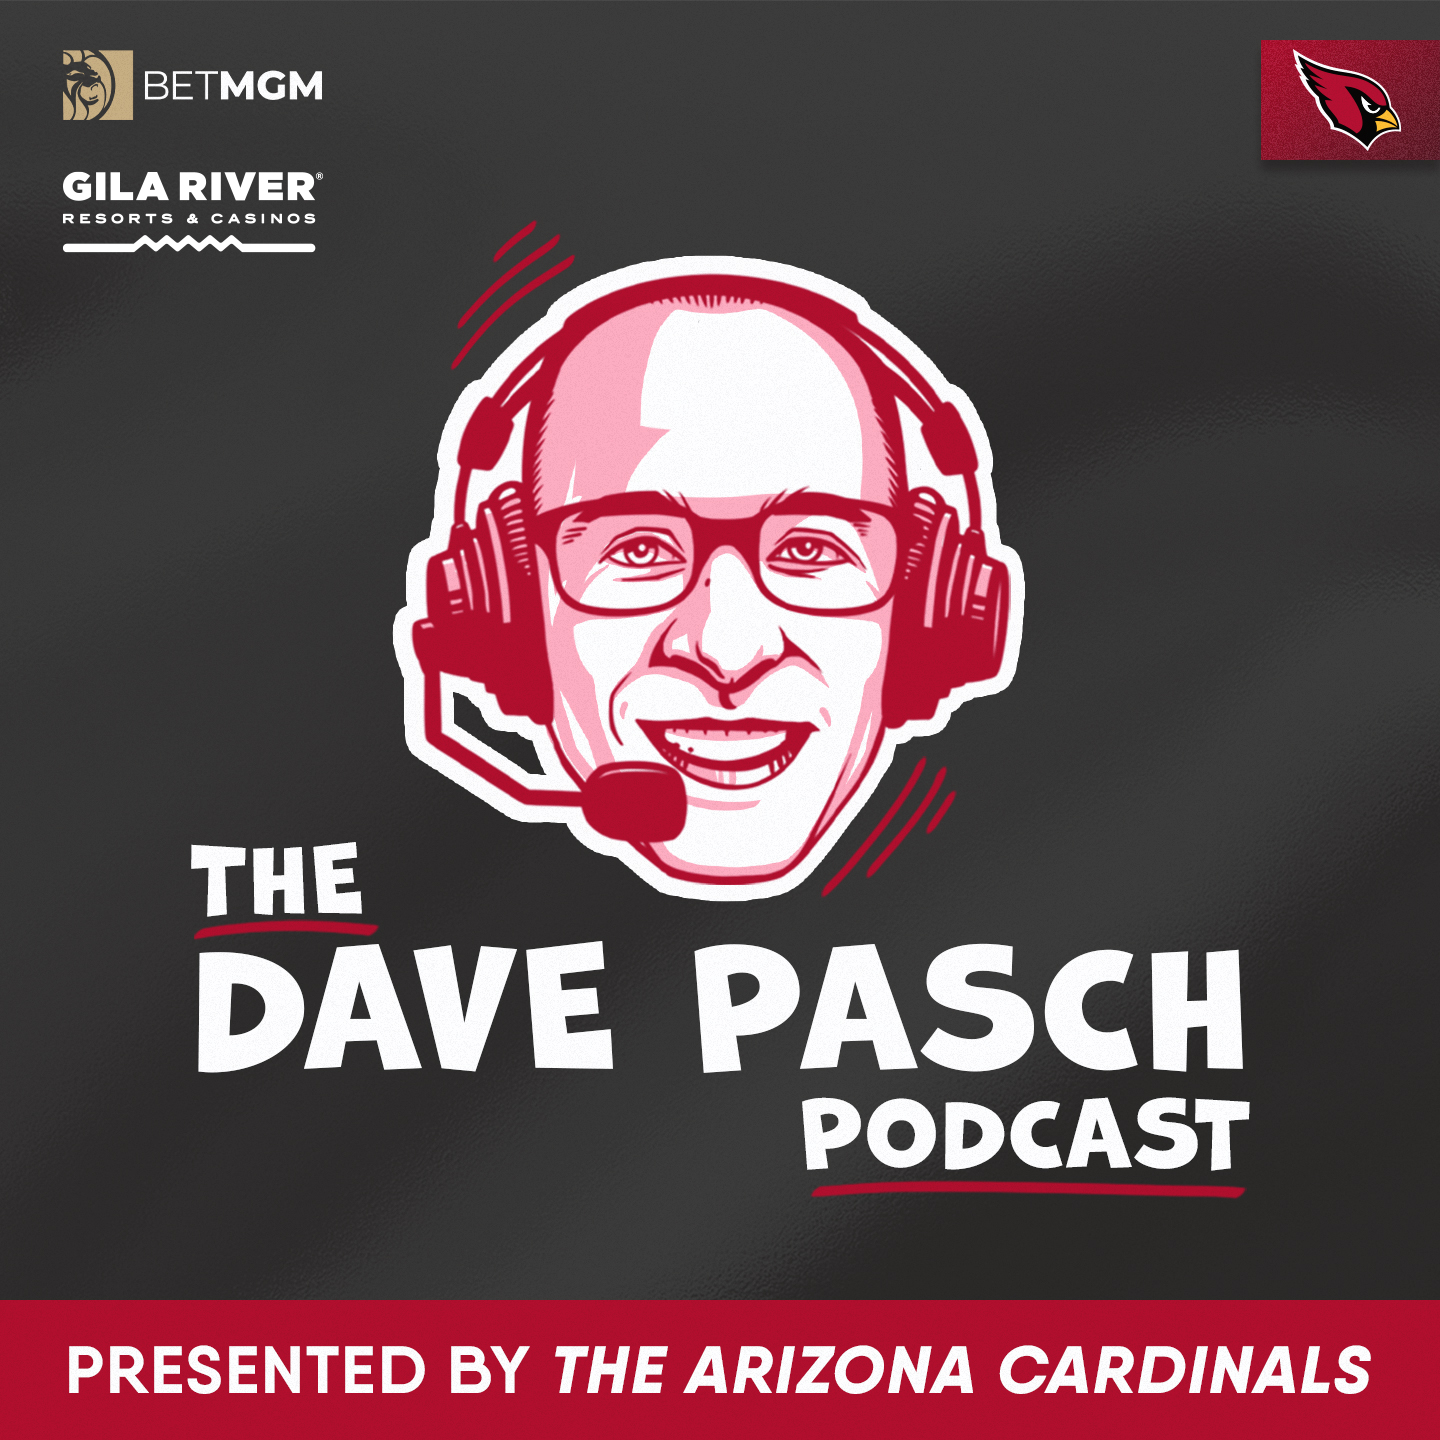 The Dave Pasch Podcast - Greg McElroy